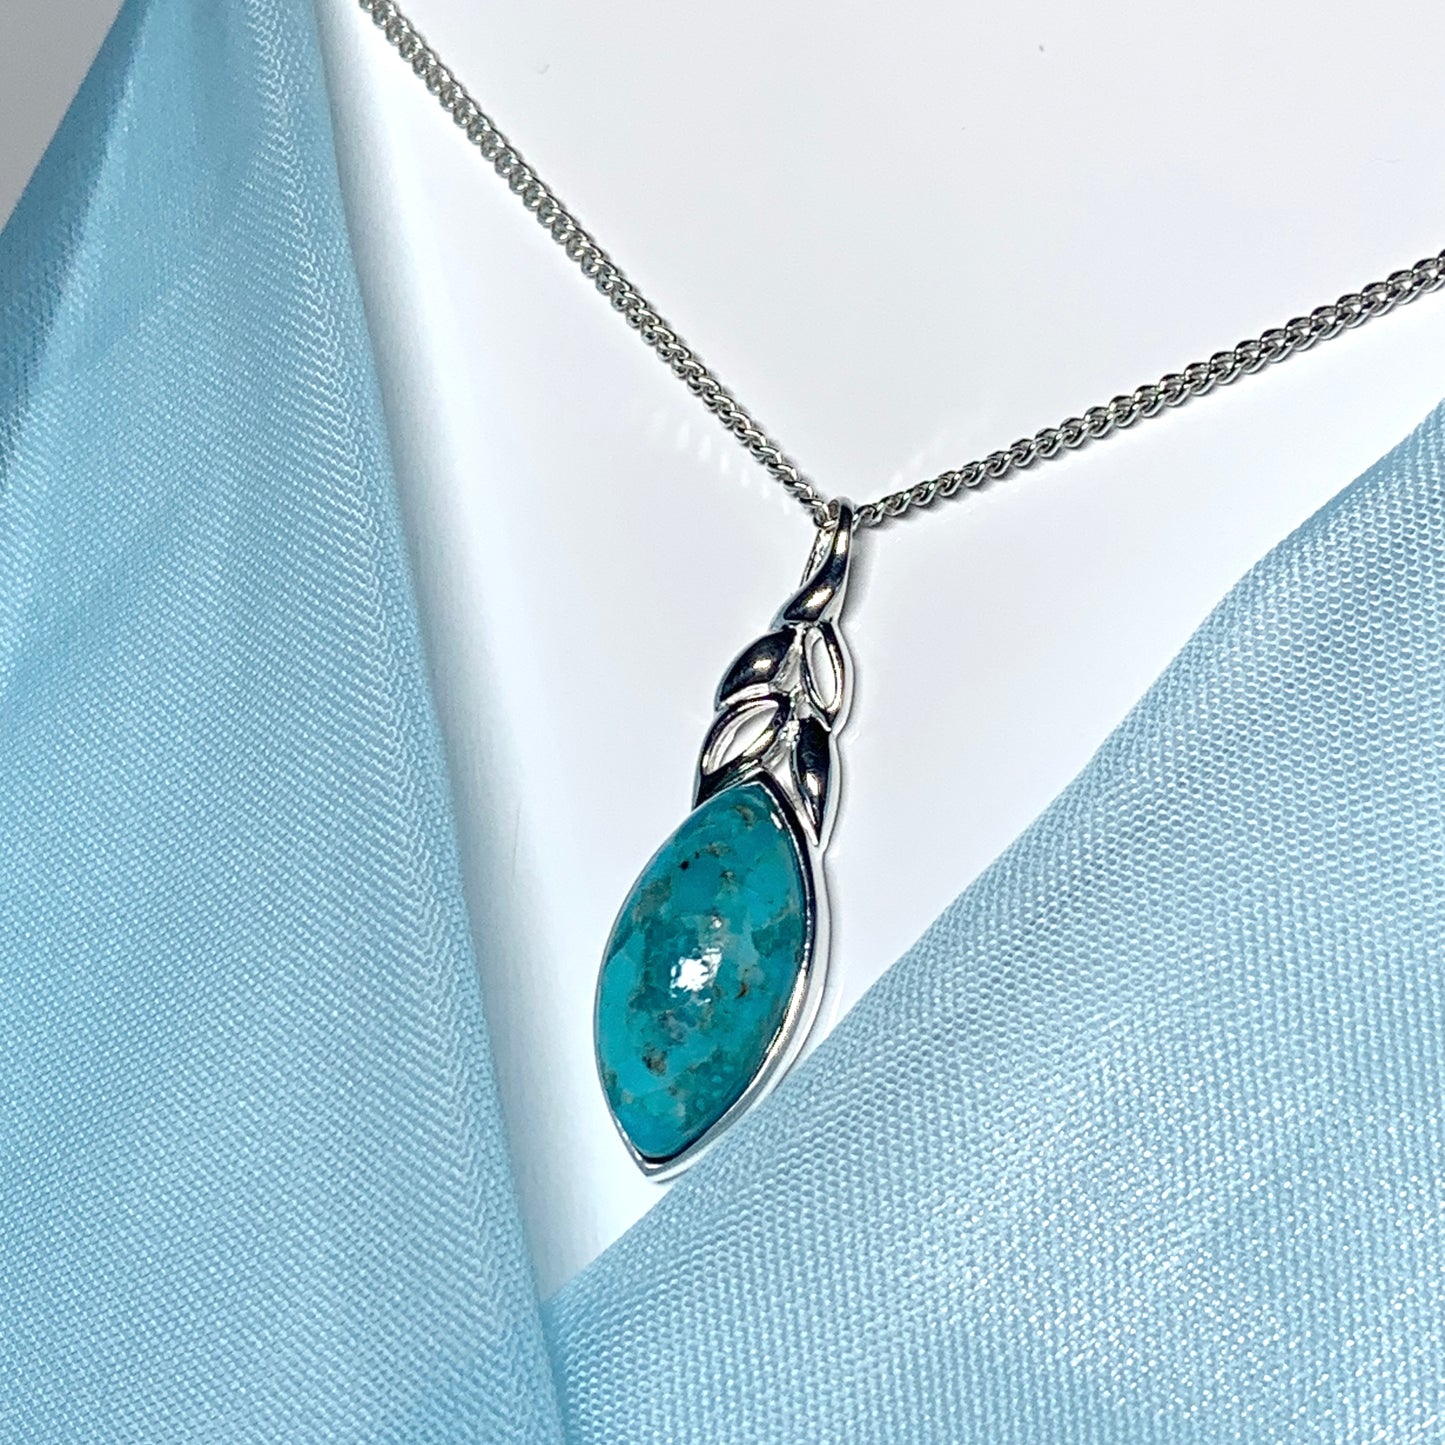 Turquoise pendant necklace marquise cut sterling silver